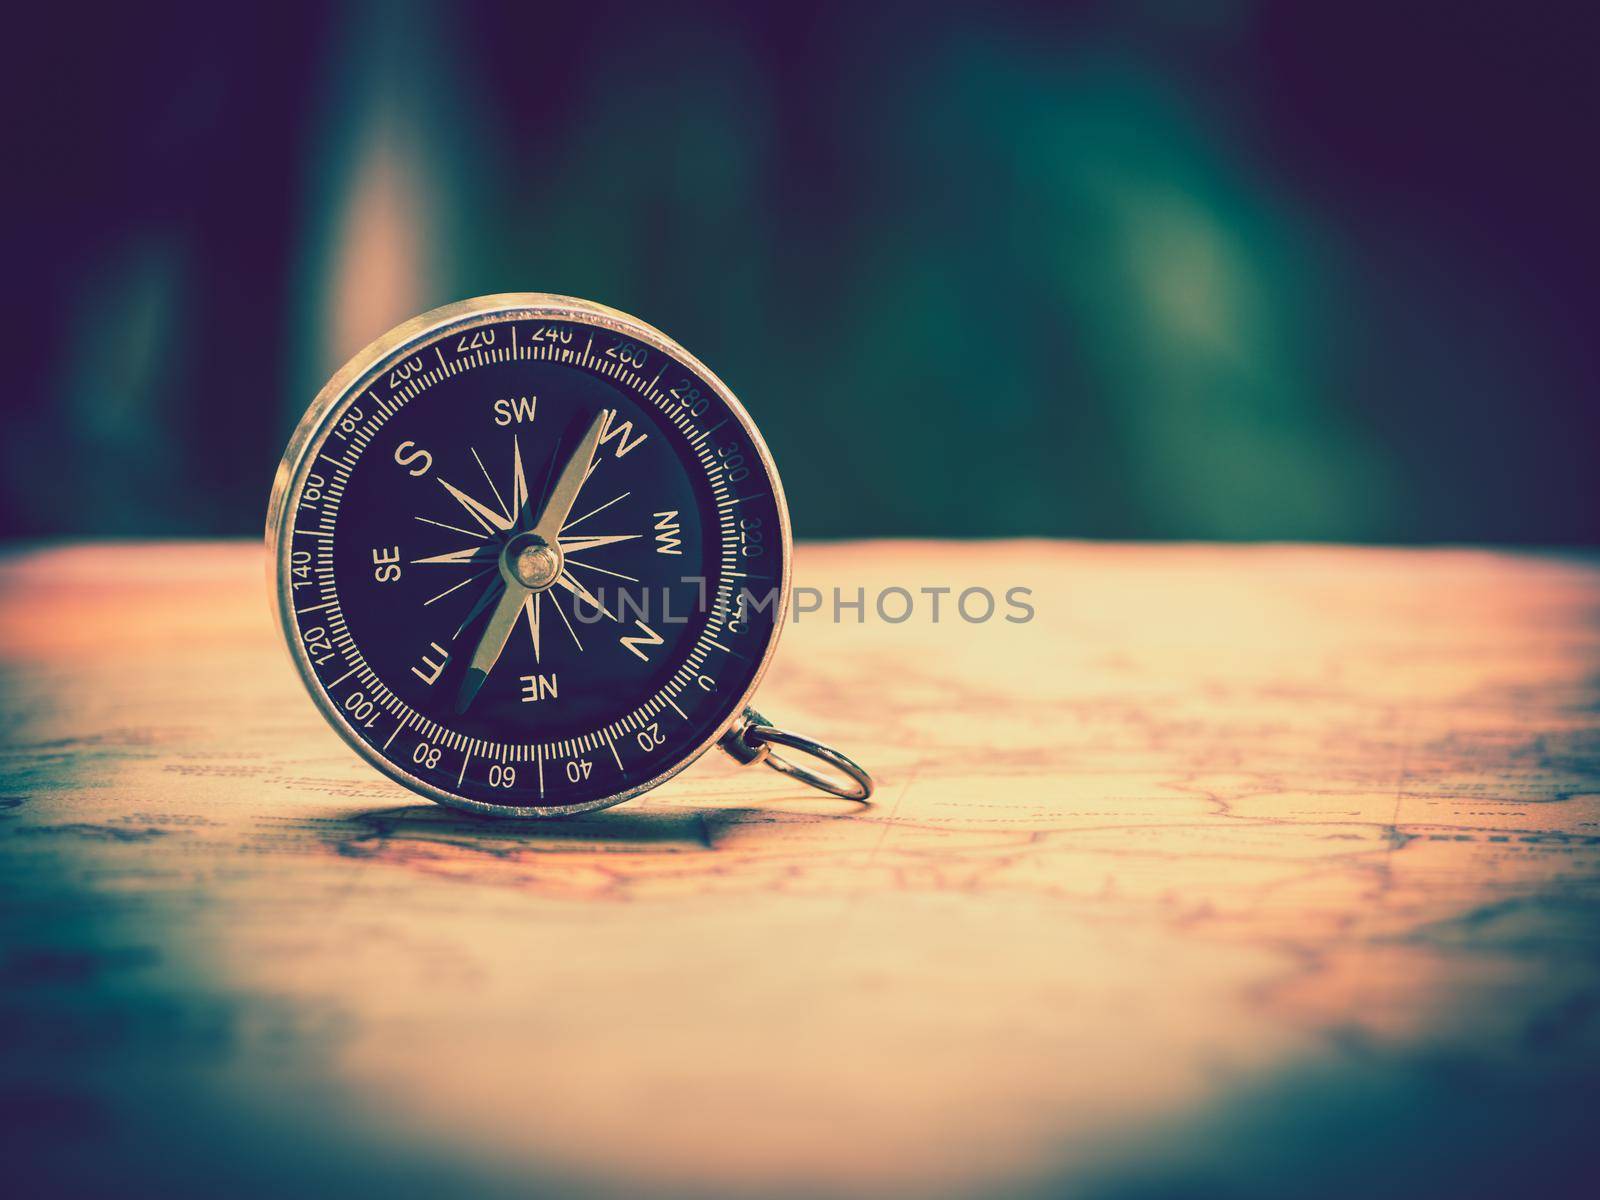 The compass is placed on the ancient or vintage world map . Travel geography navigation concept background.